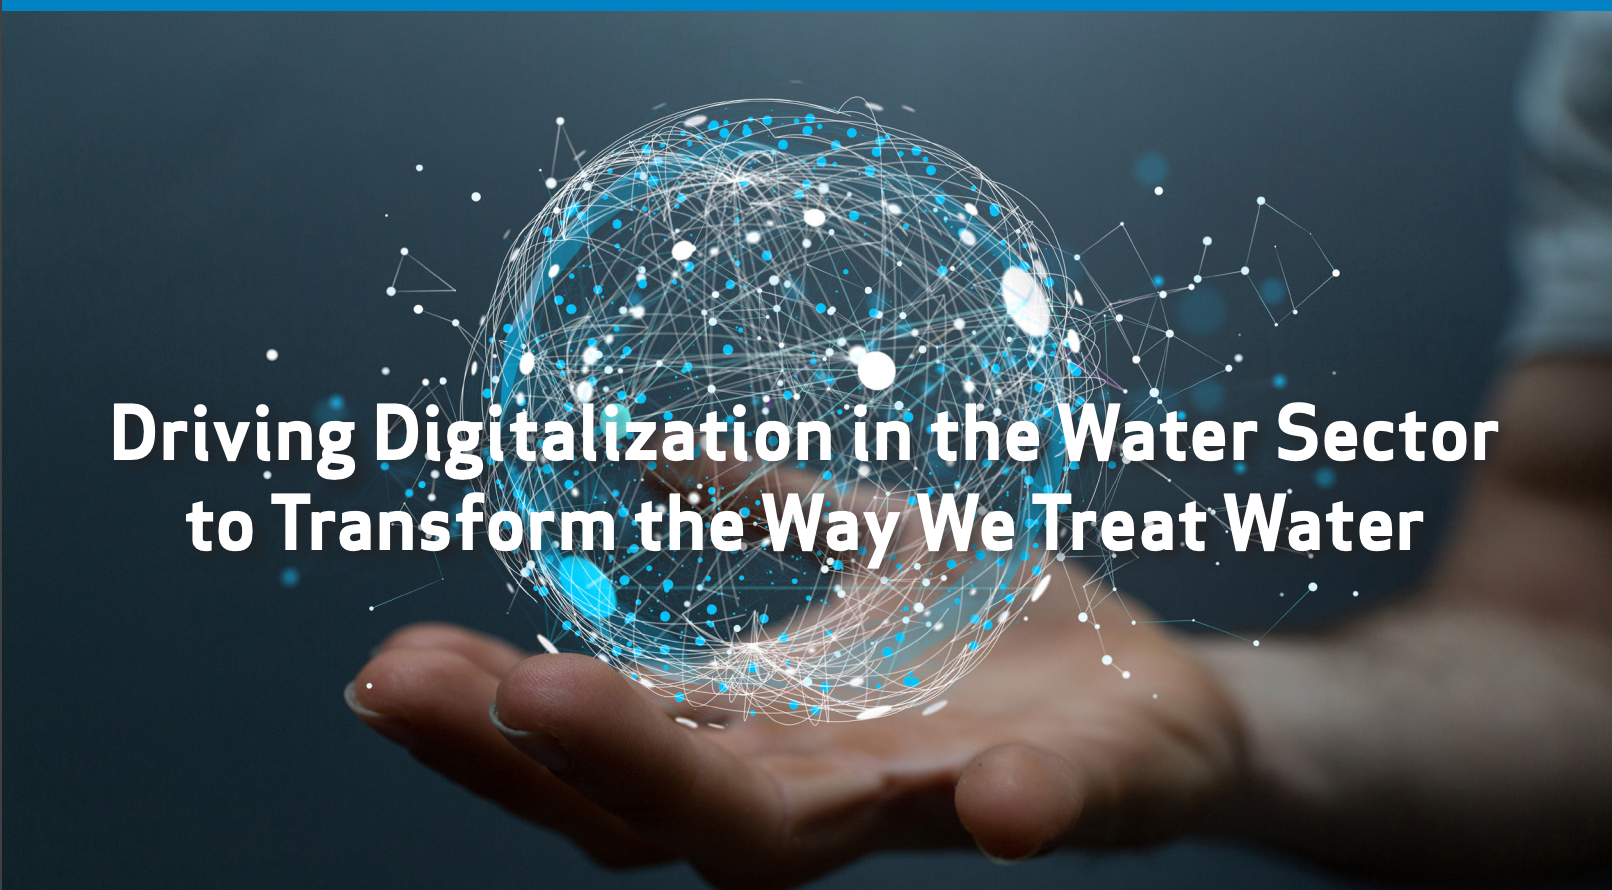 Driving Digitalization in the Water Sector to Transform the Way We Treat Water